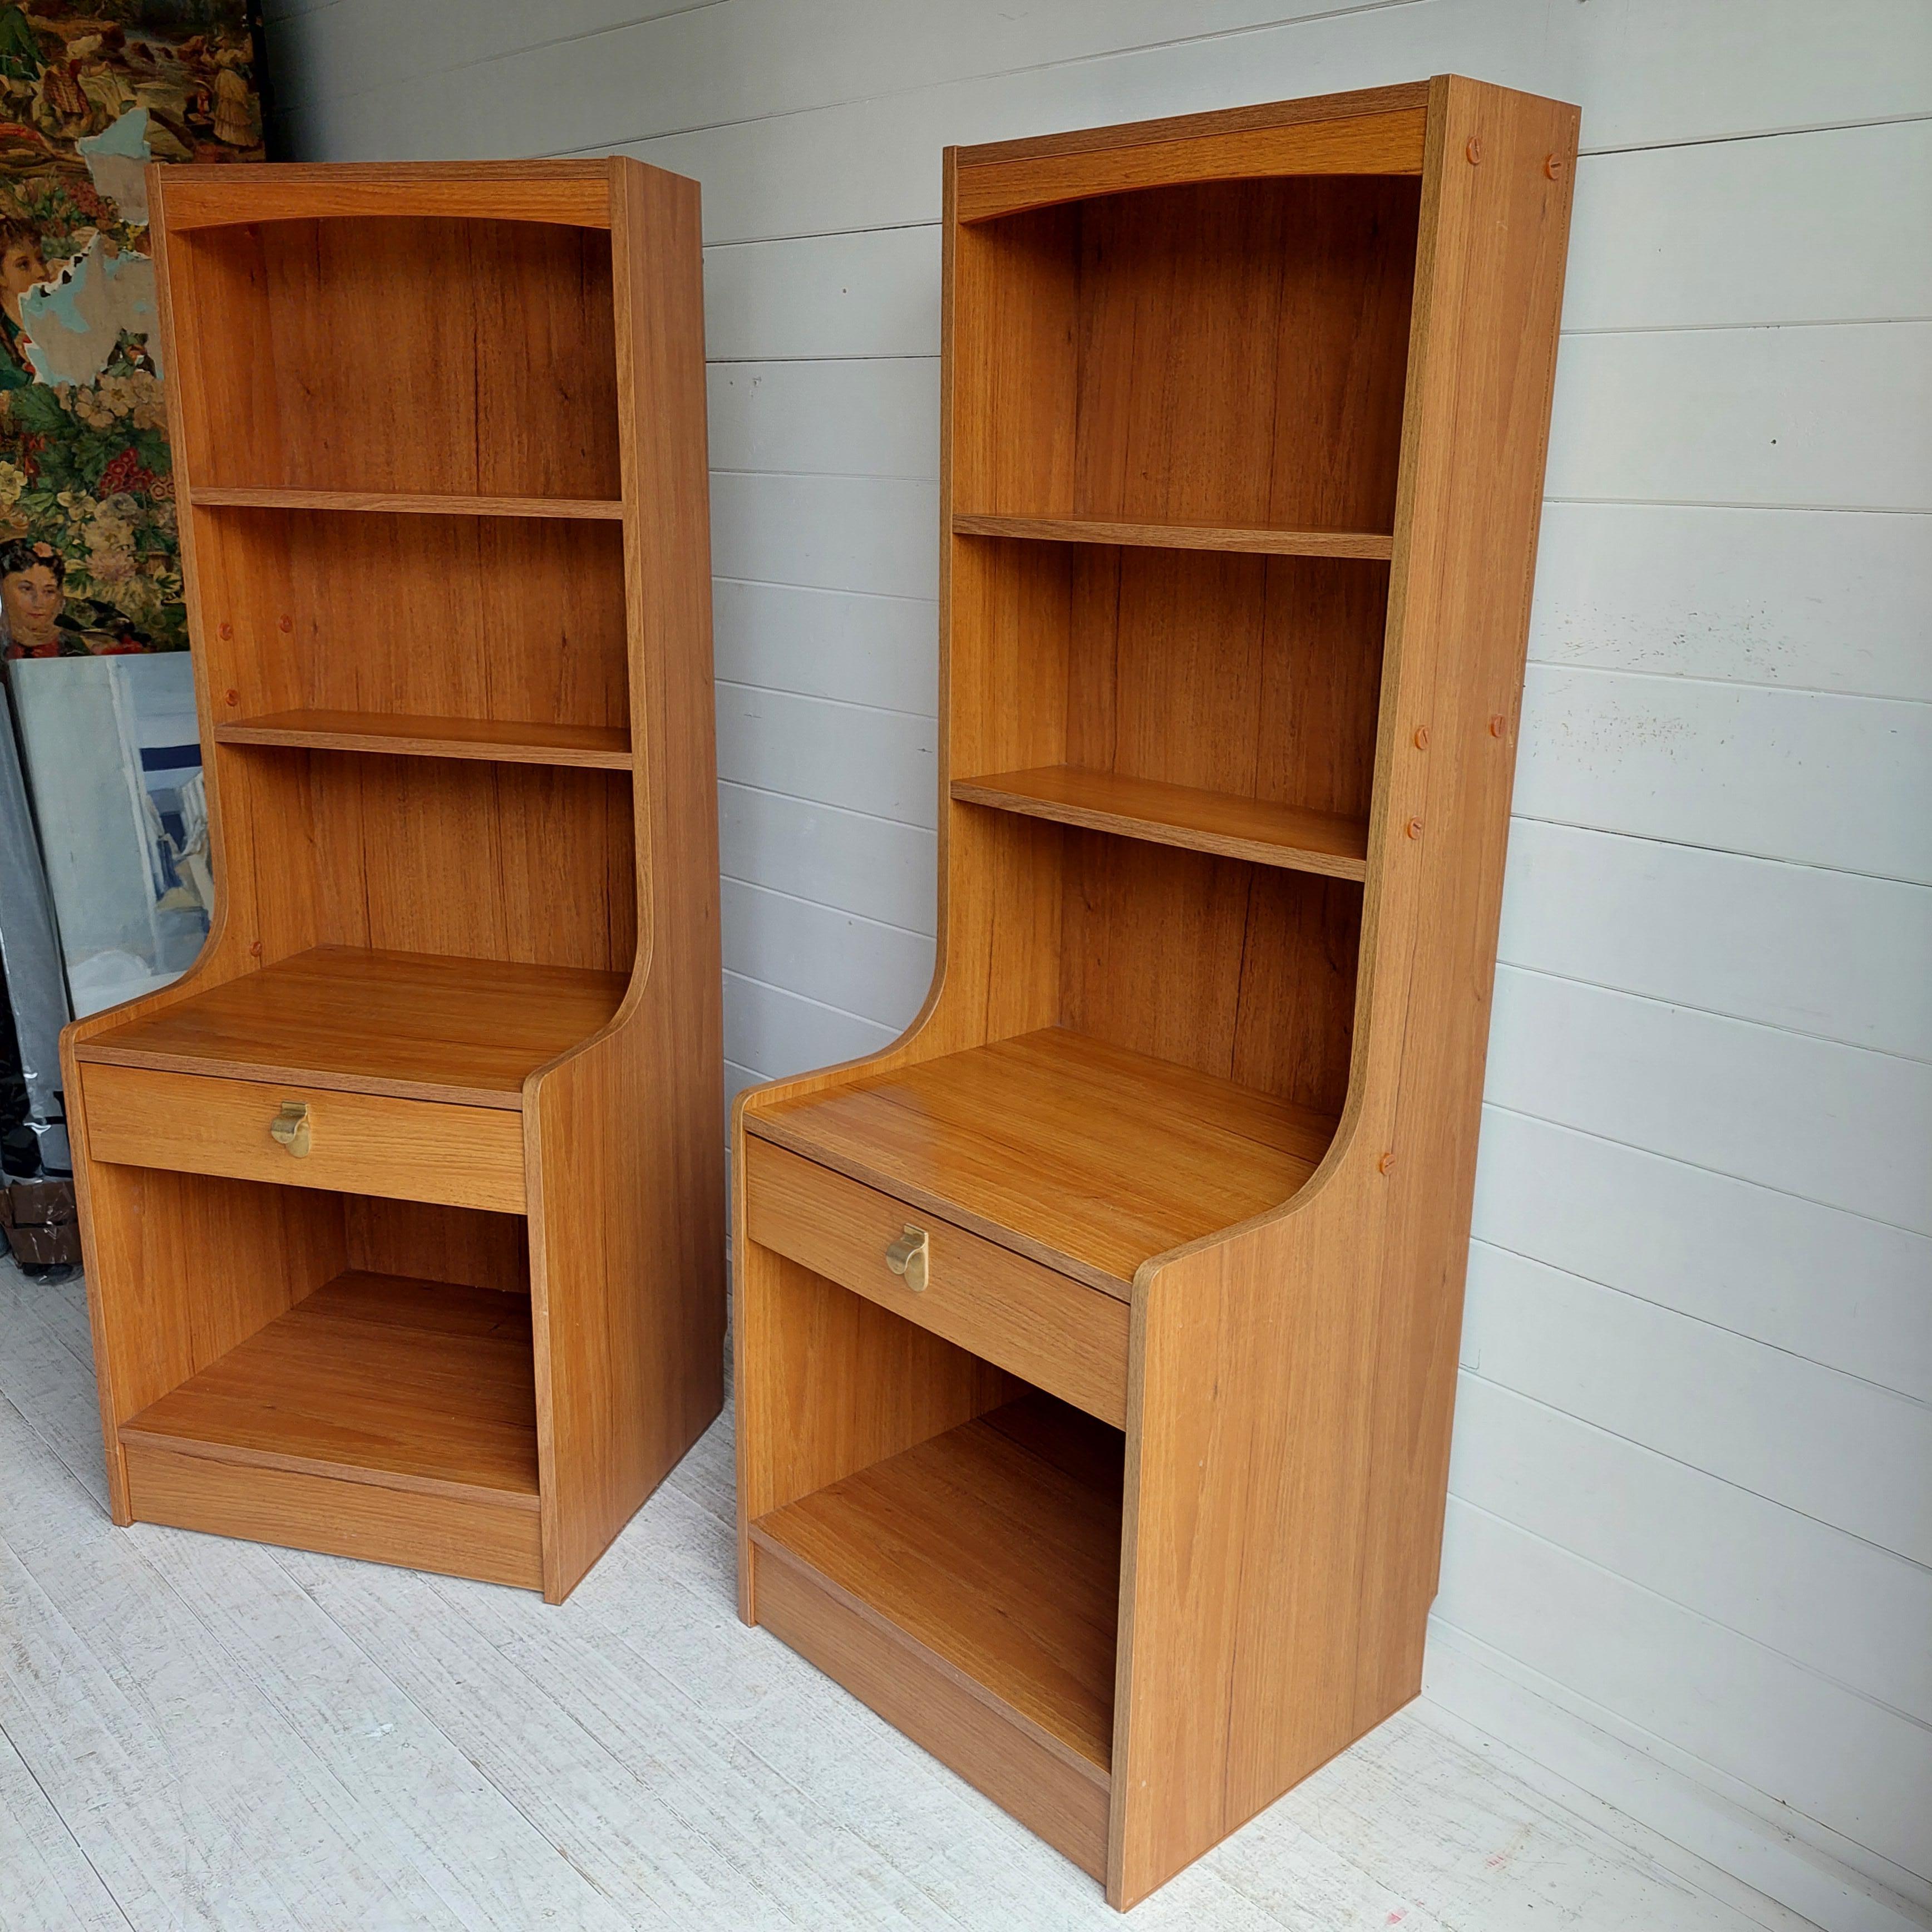 20th Century Mid Century Pair of Teak effect Bedside Tables shelving units by Schreiber, 70s For Sale